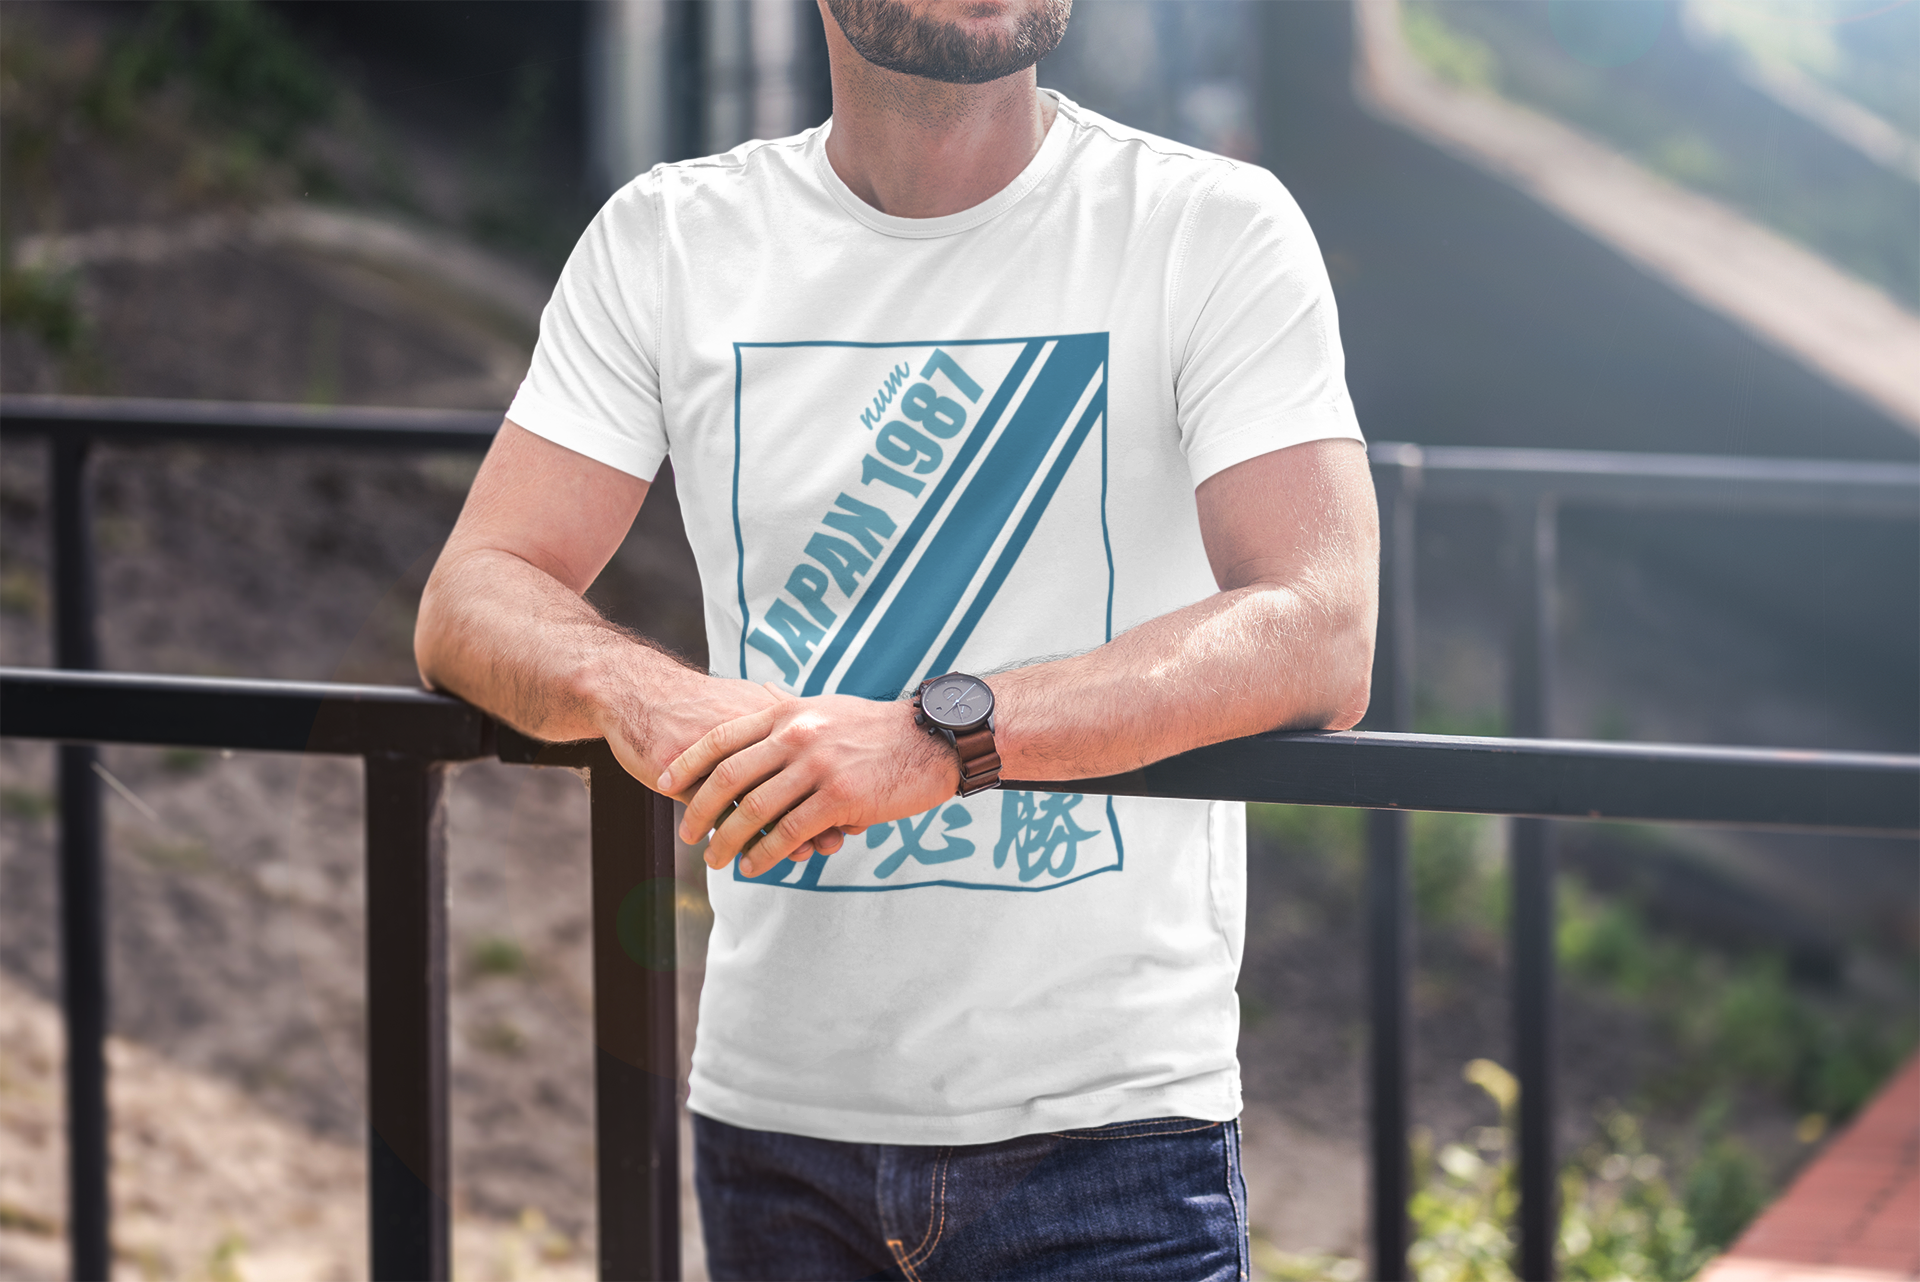 cropped-face-mockup-of-a-man-wearing-a-t-shirt-and-leaning-against-a-handrail-2966-el1.png